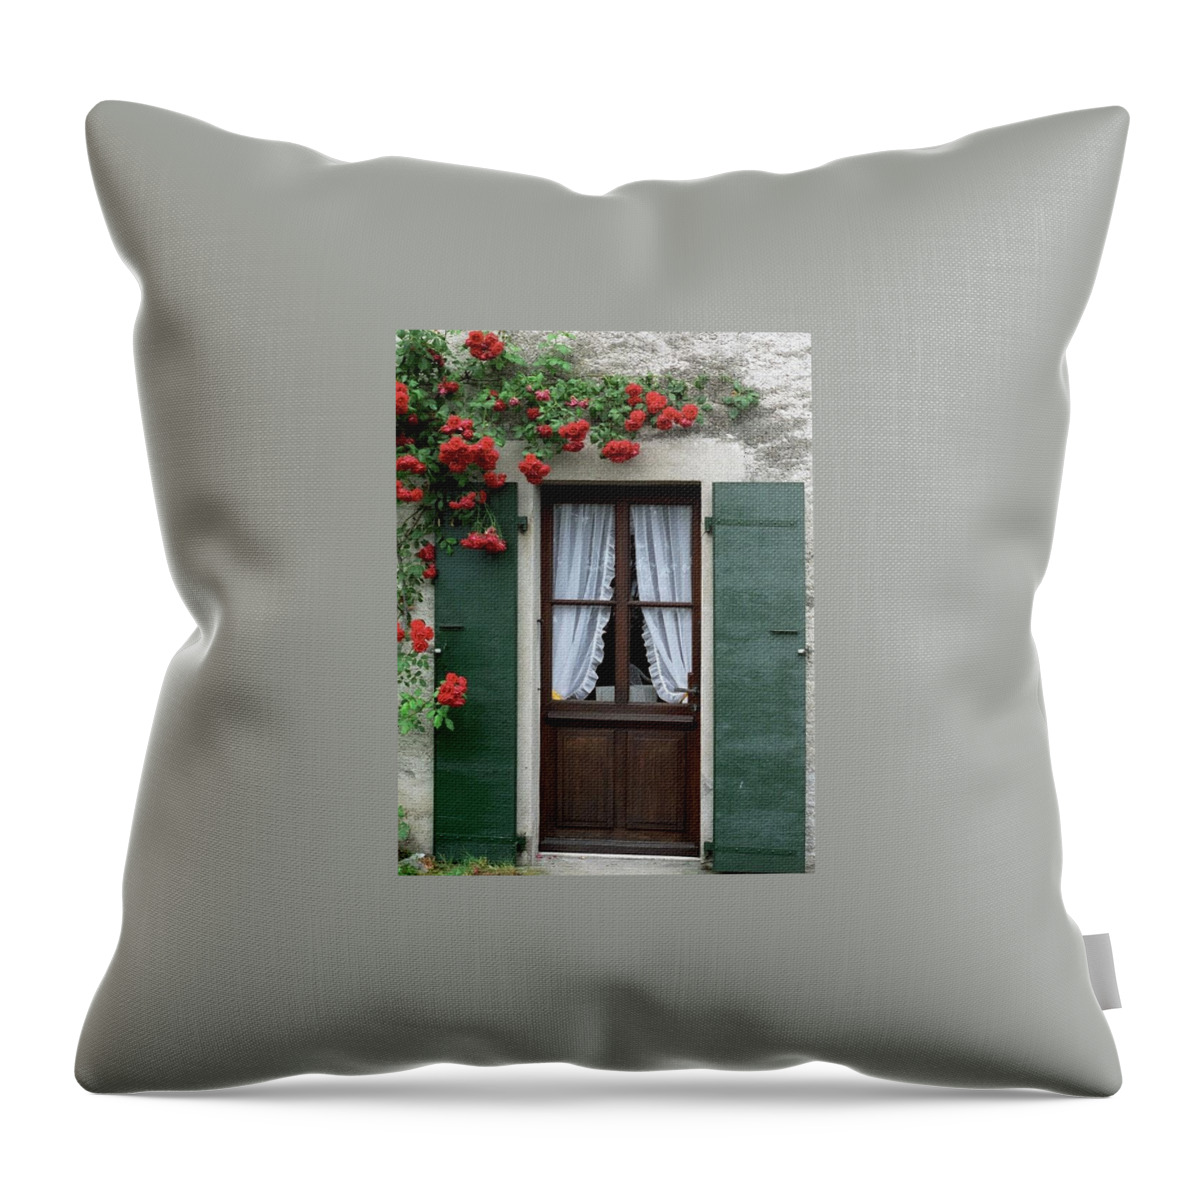  Throw Pillow featuring the photograph Red Rose Door by Susie Rieple